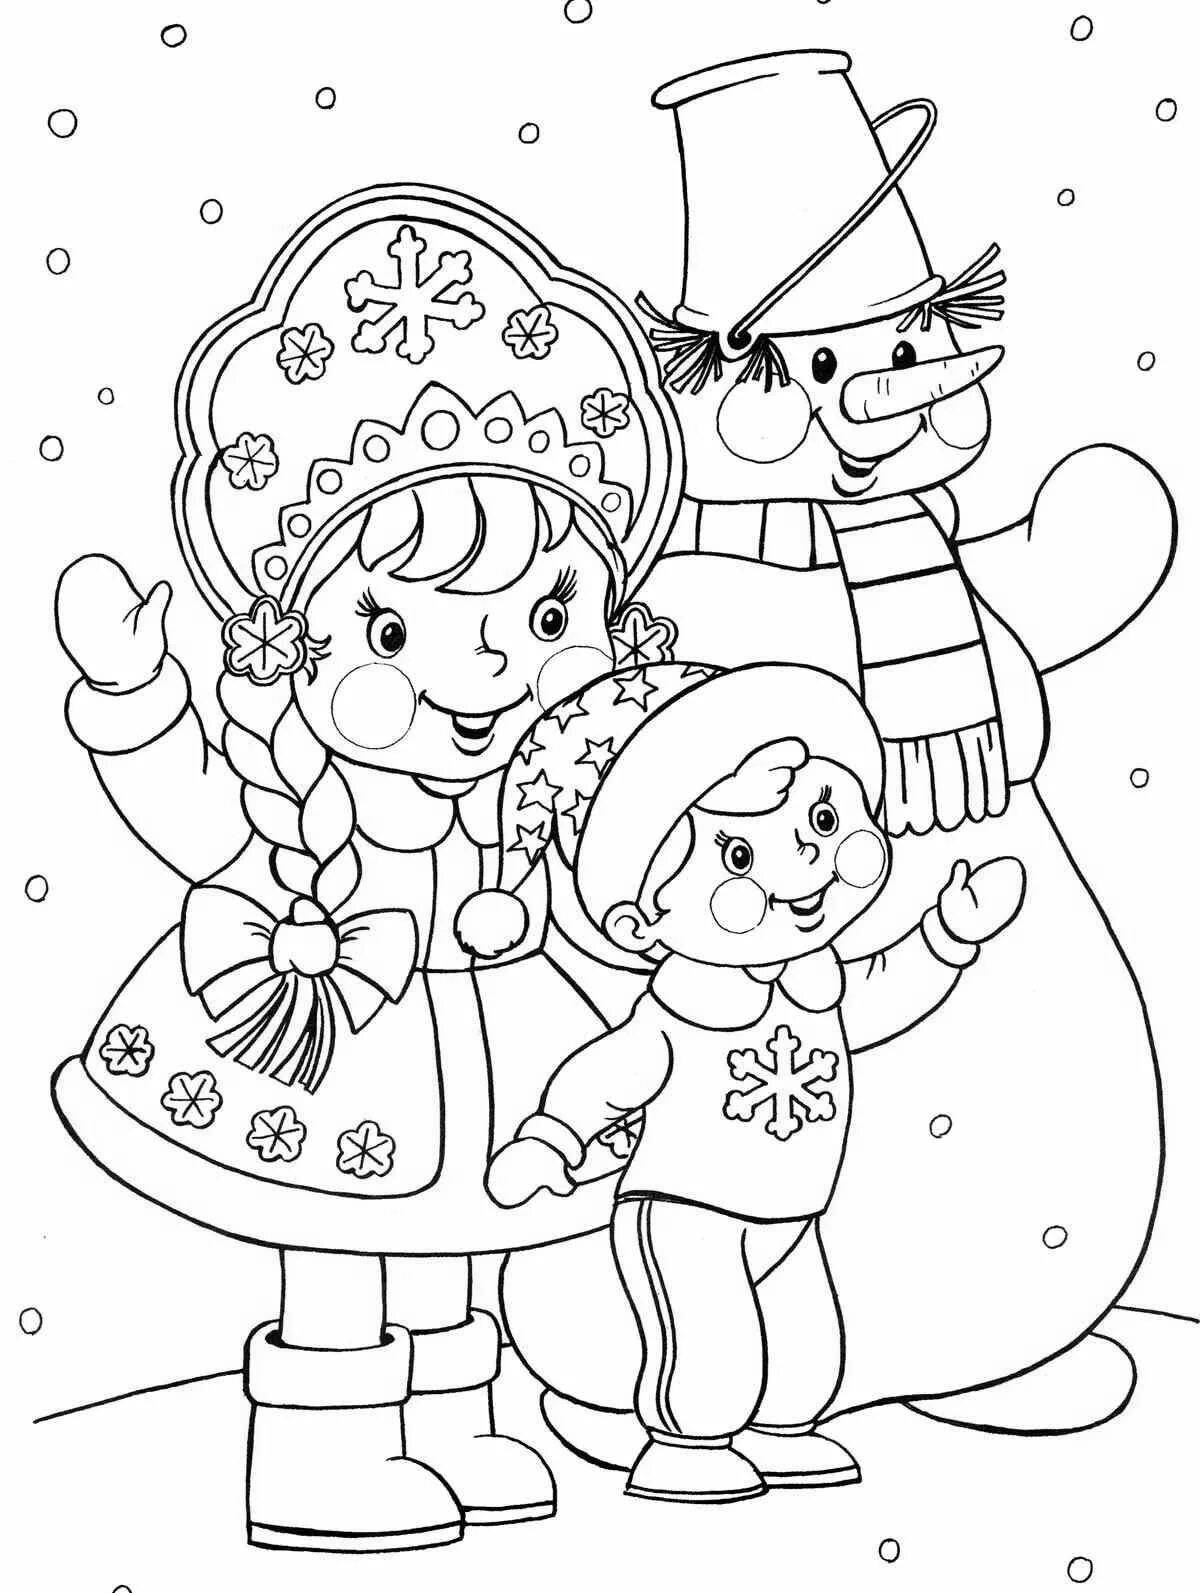 Christmas coloring book #6